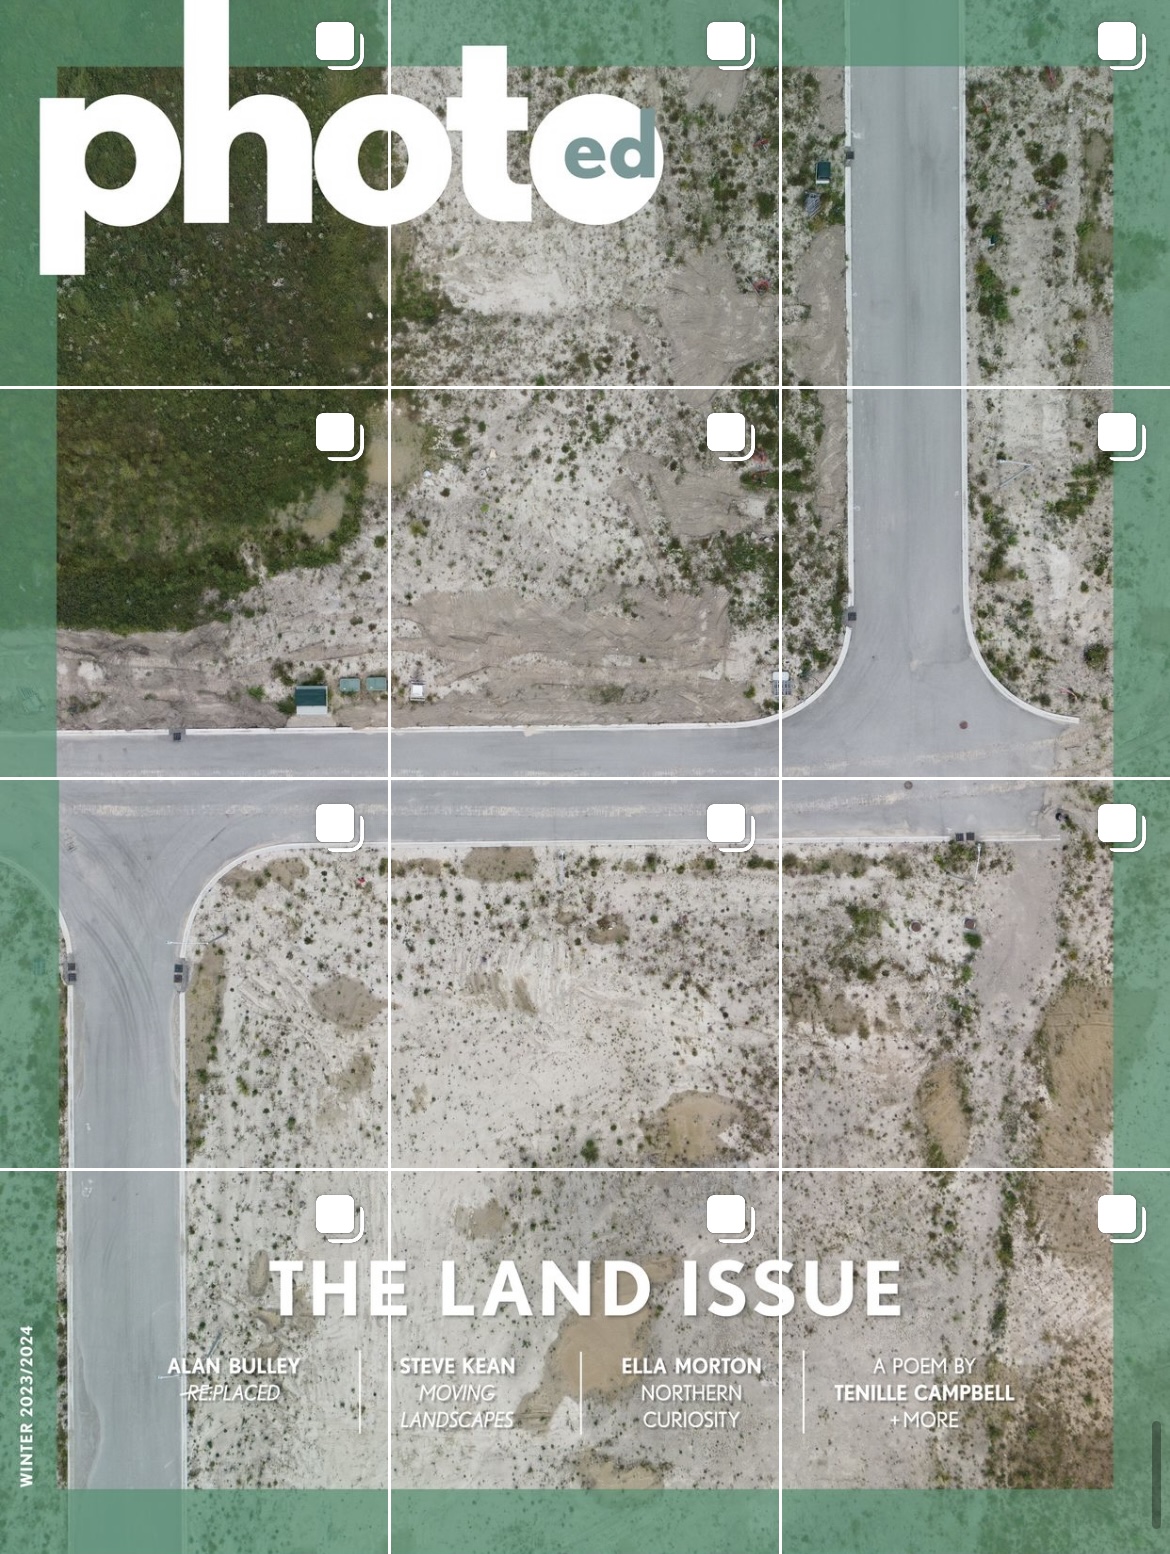 A decorative images of the cover of a magazine divided into 12 squares (posts) for instagram. The magainze name is PhotoEd, it is The LAND issue.